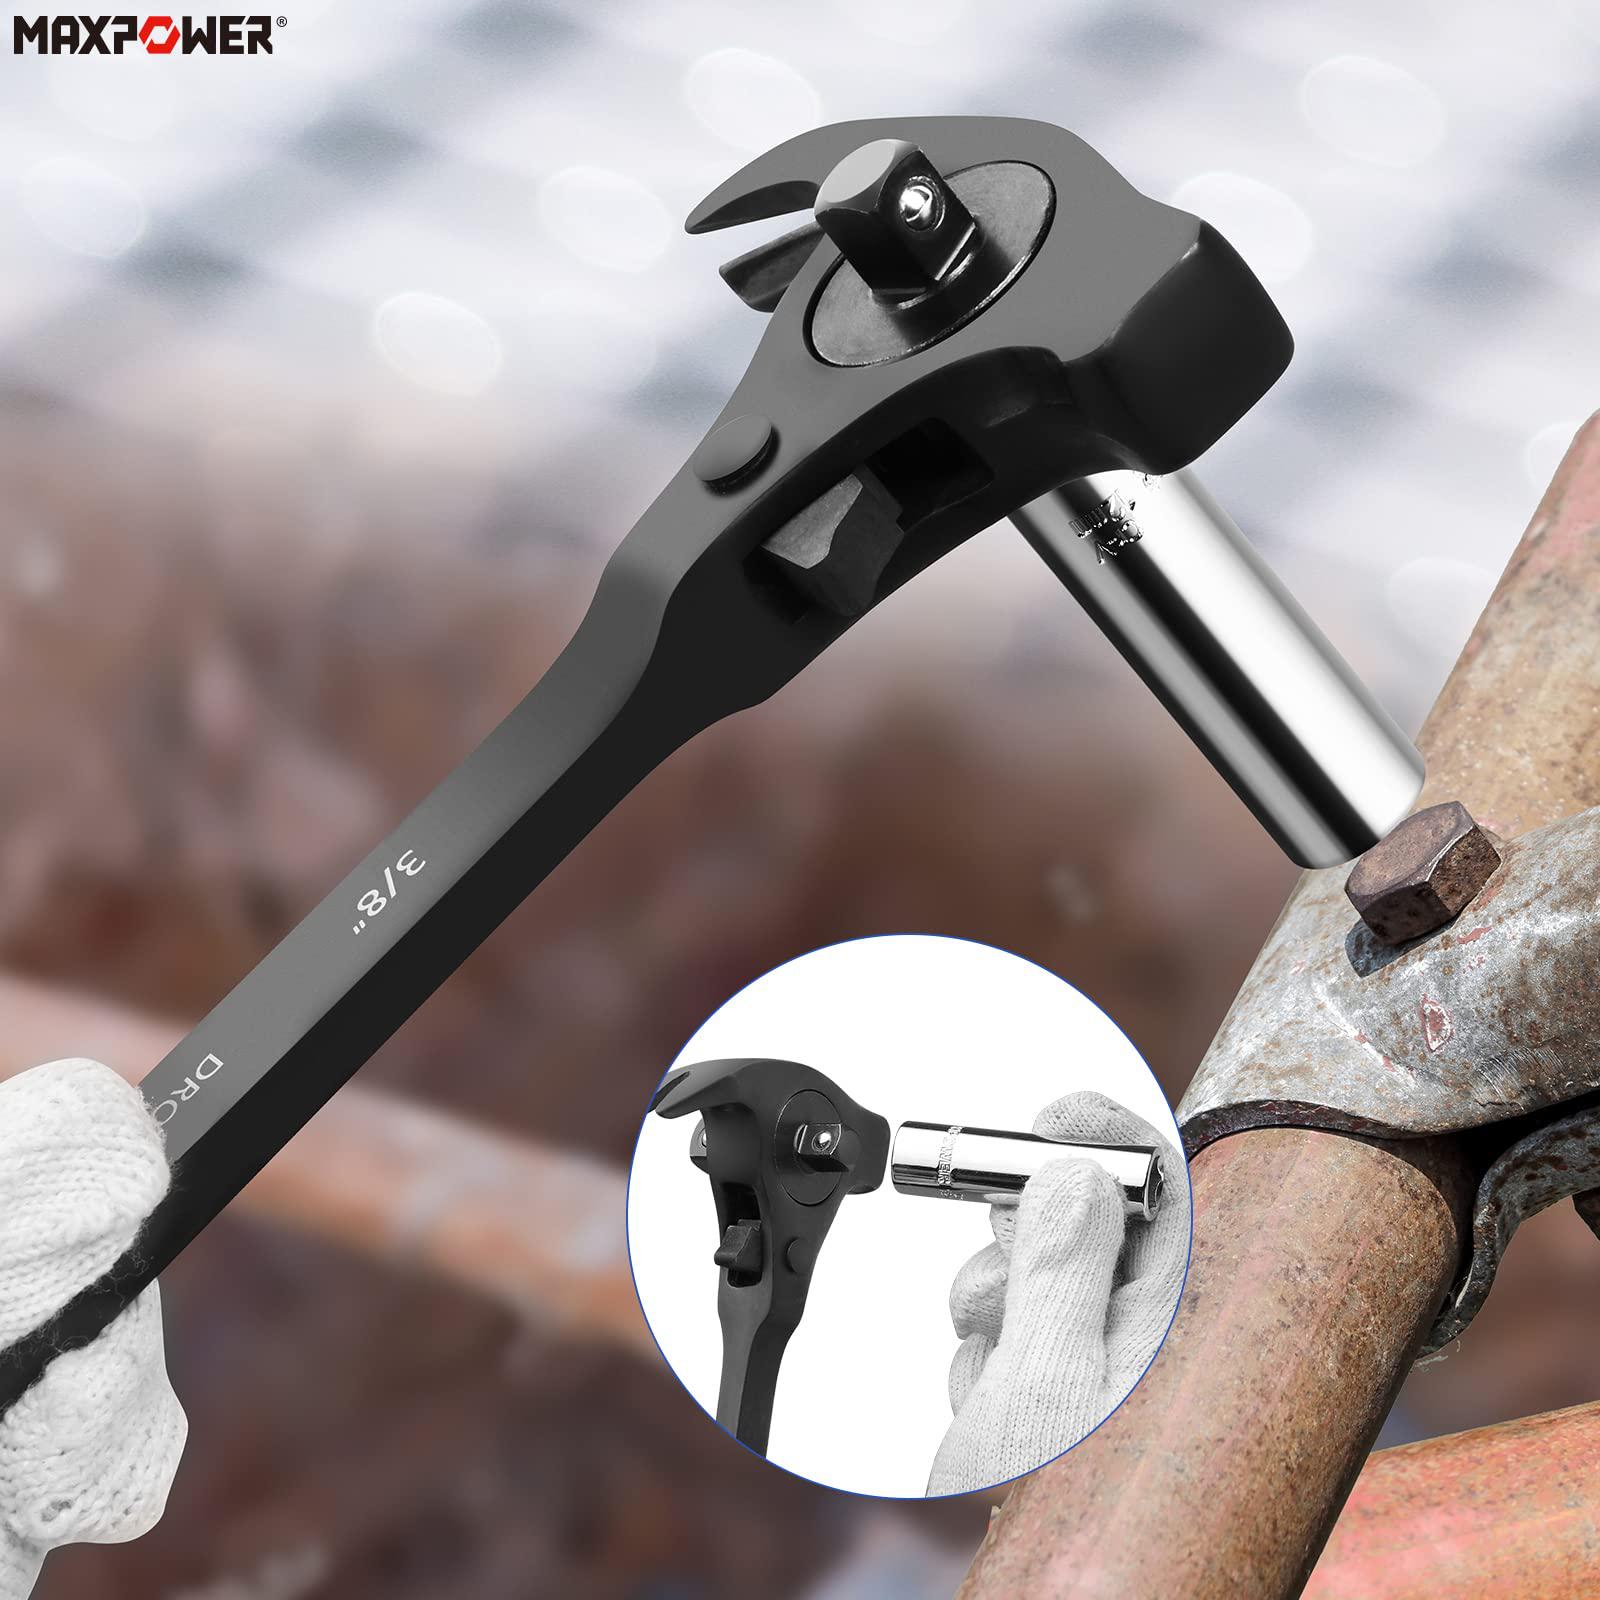 maxpower 1/2" and 3/8" drive scaffold ratchet wrench, podger spanner with claw hammer, crowbar, pry bar and nail puller funct